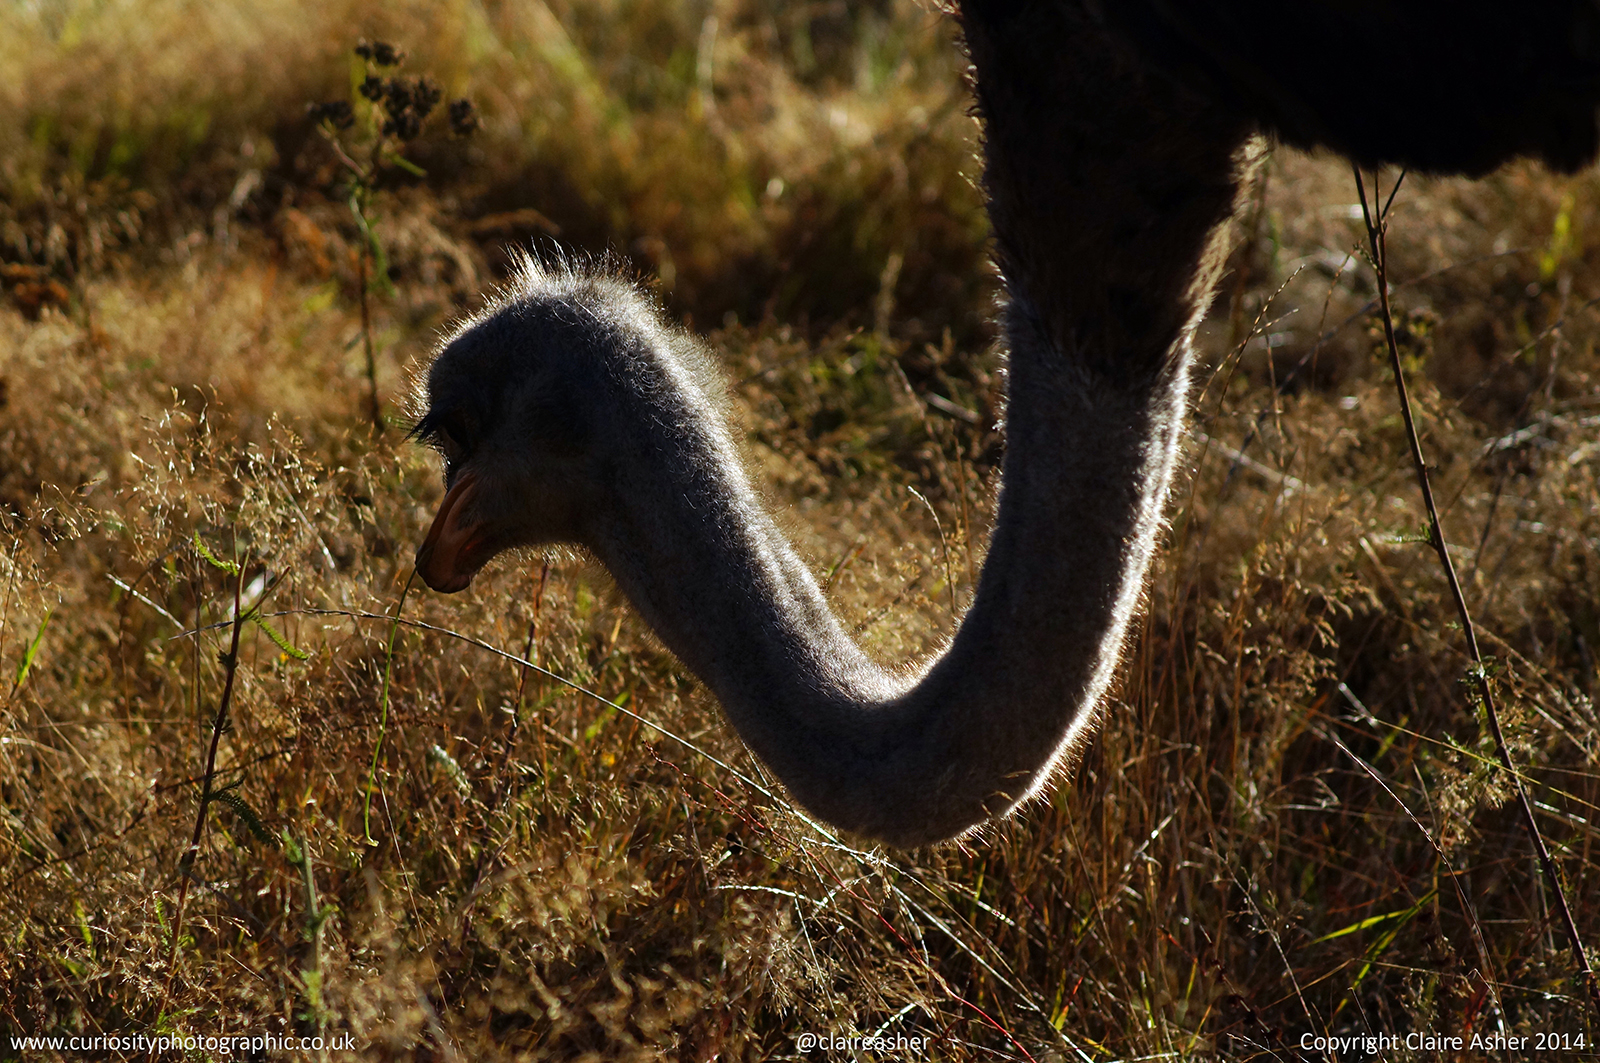 An Ostrich (Struthio camelus) photographed in captivity in New Zealand in 2014.